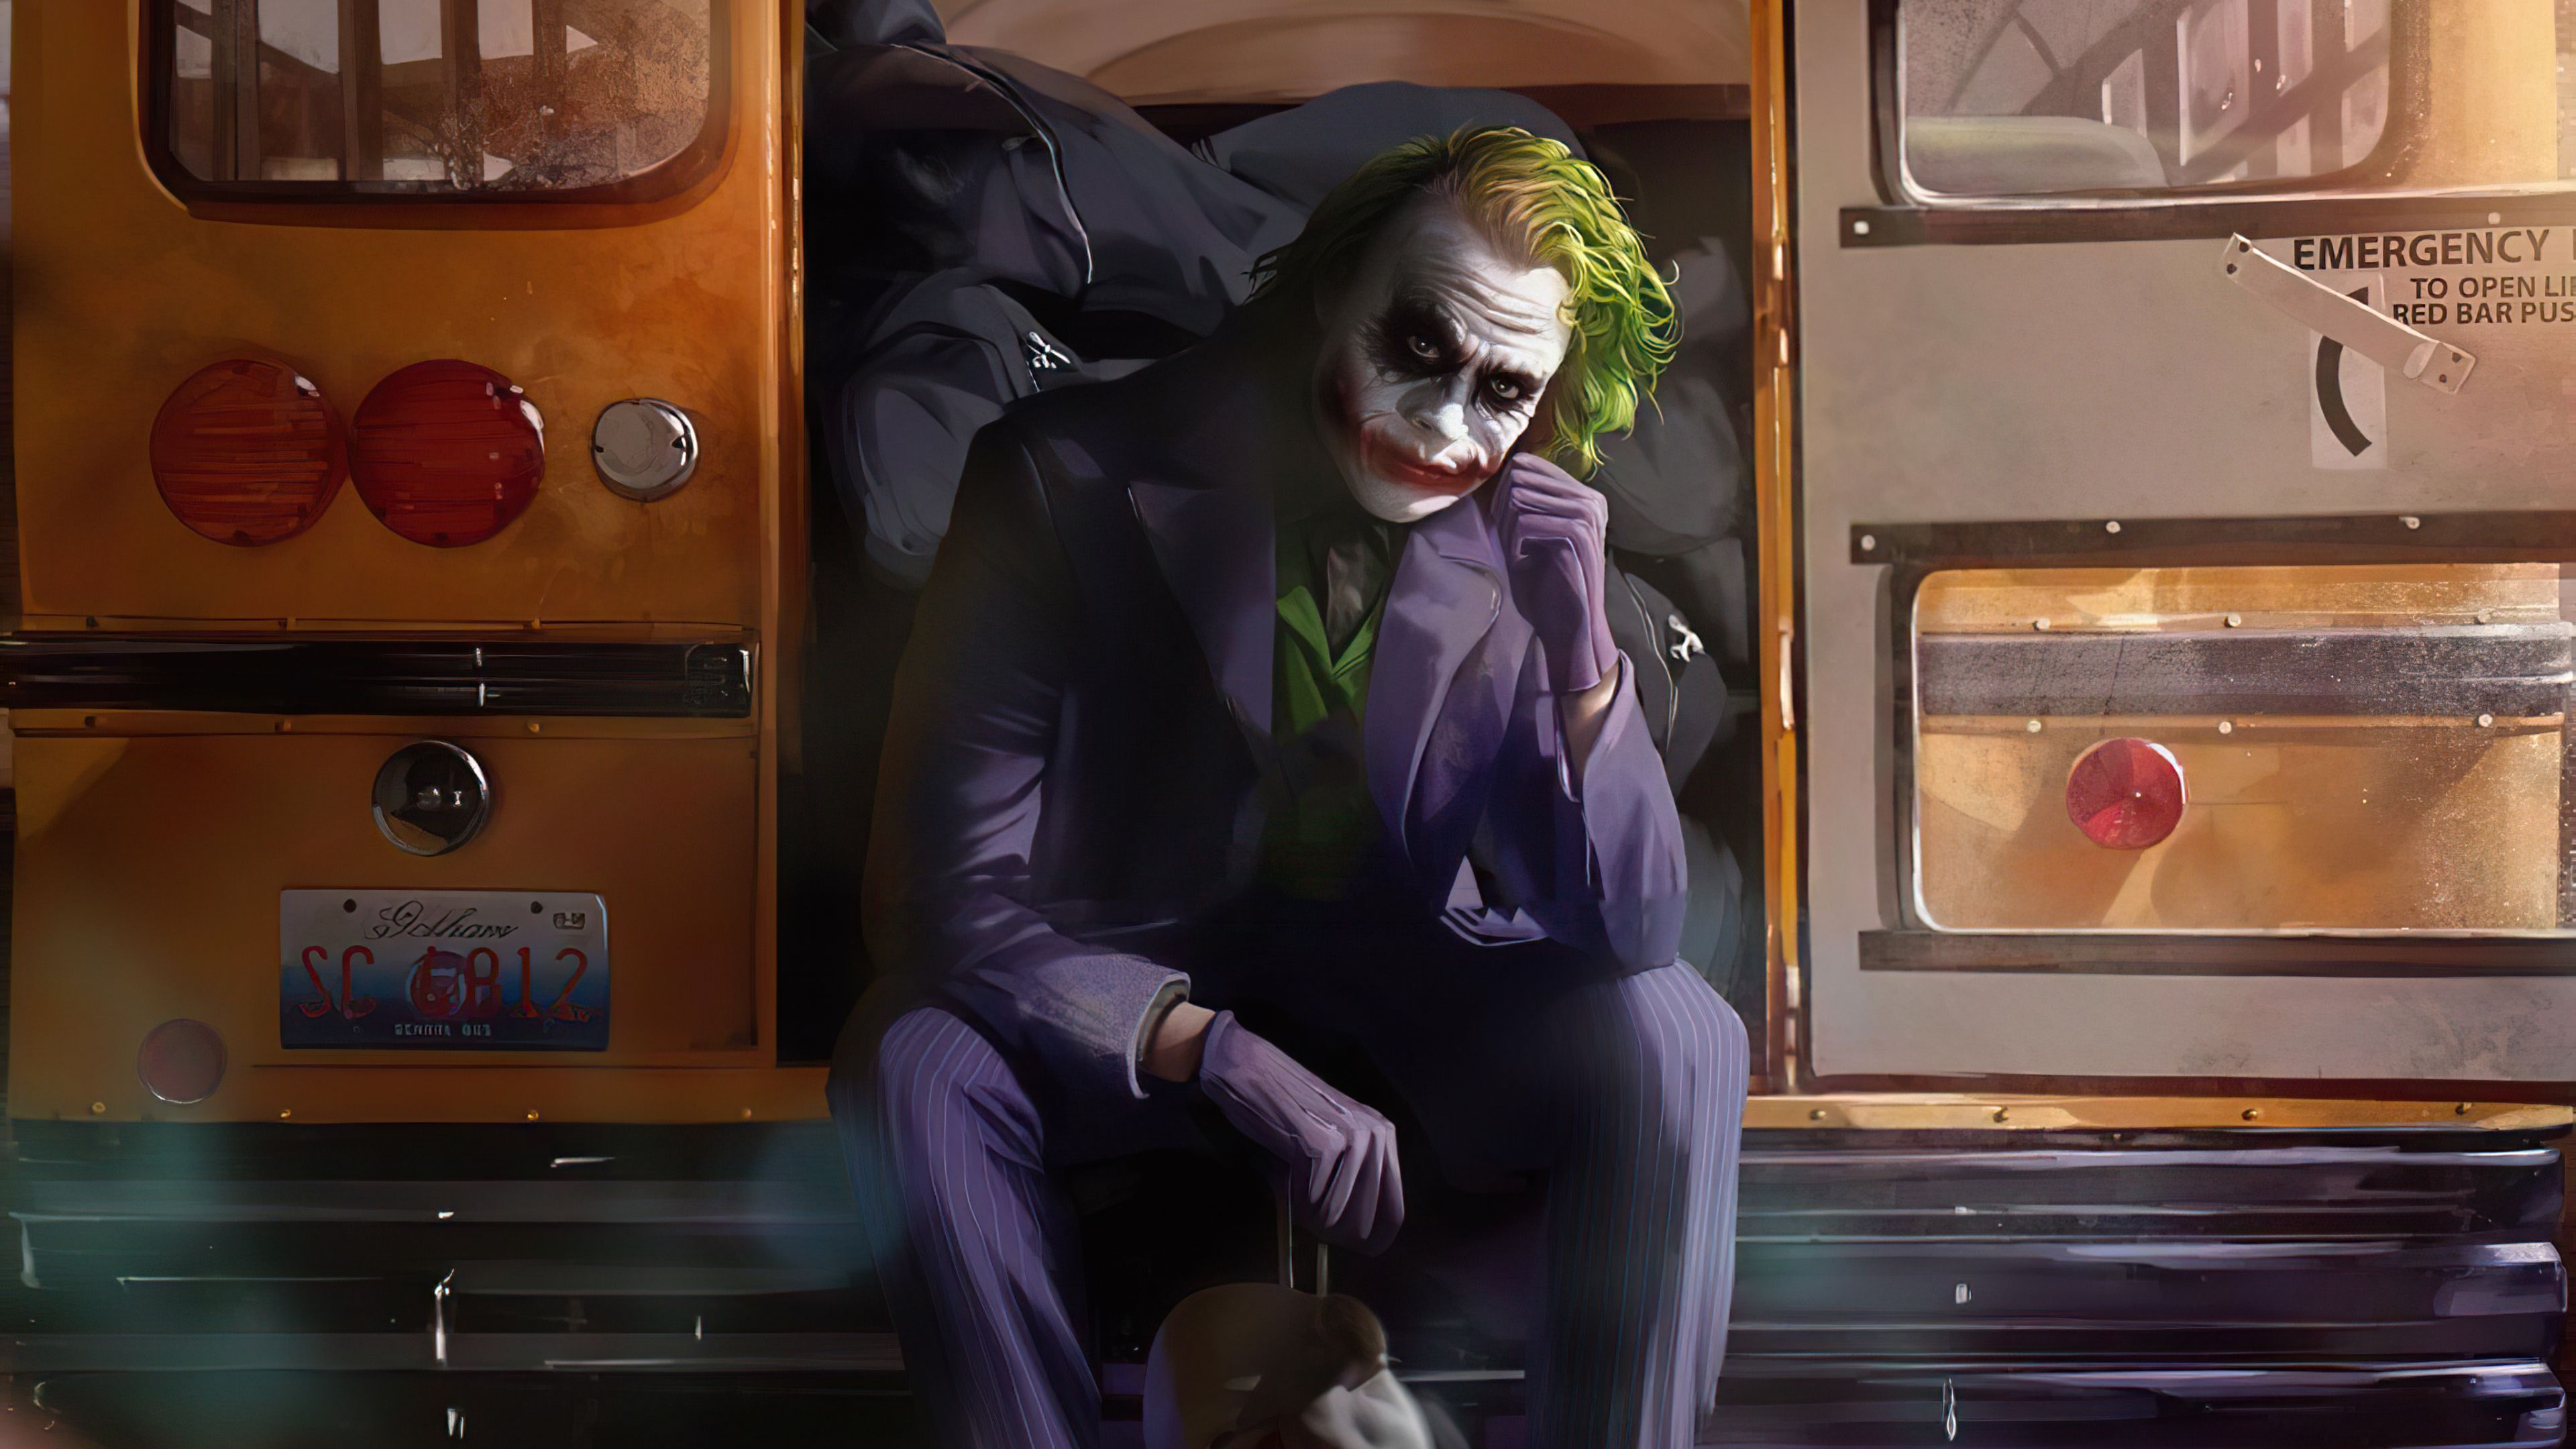 Joker 4K wallpaper for your desktop or mobile screen free and easy to download